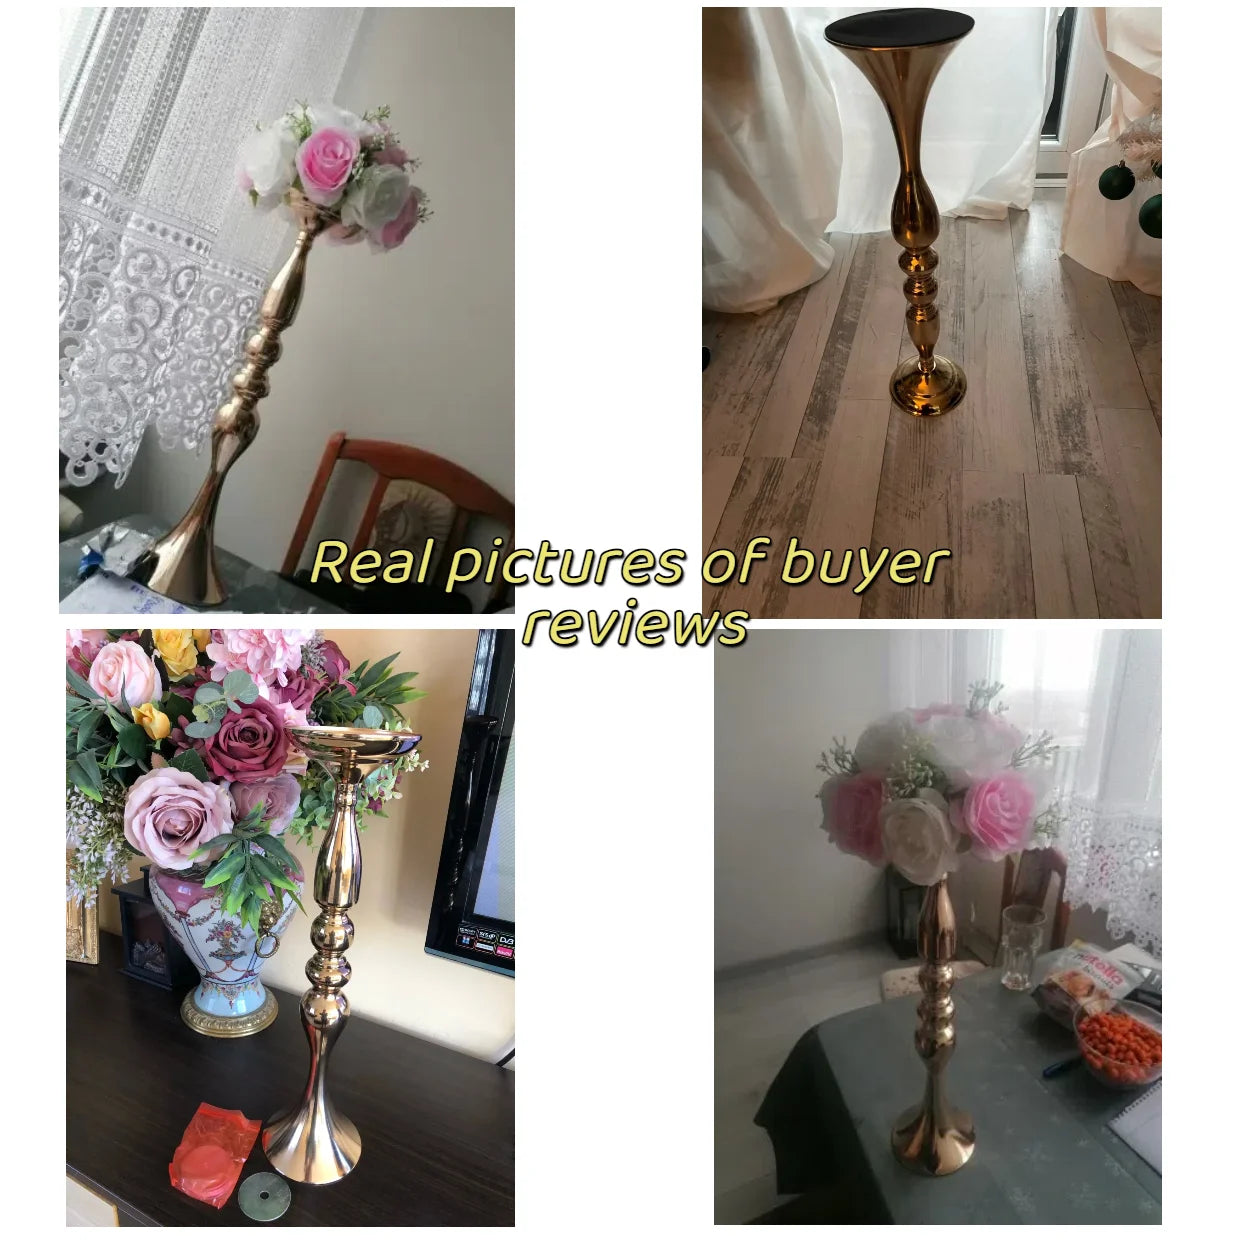 10pcs Gold Centerpieces Candle Holder Flower Stand Rack